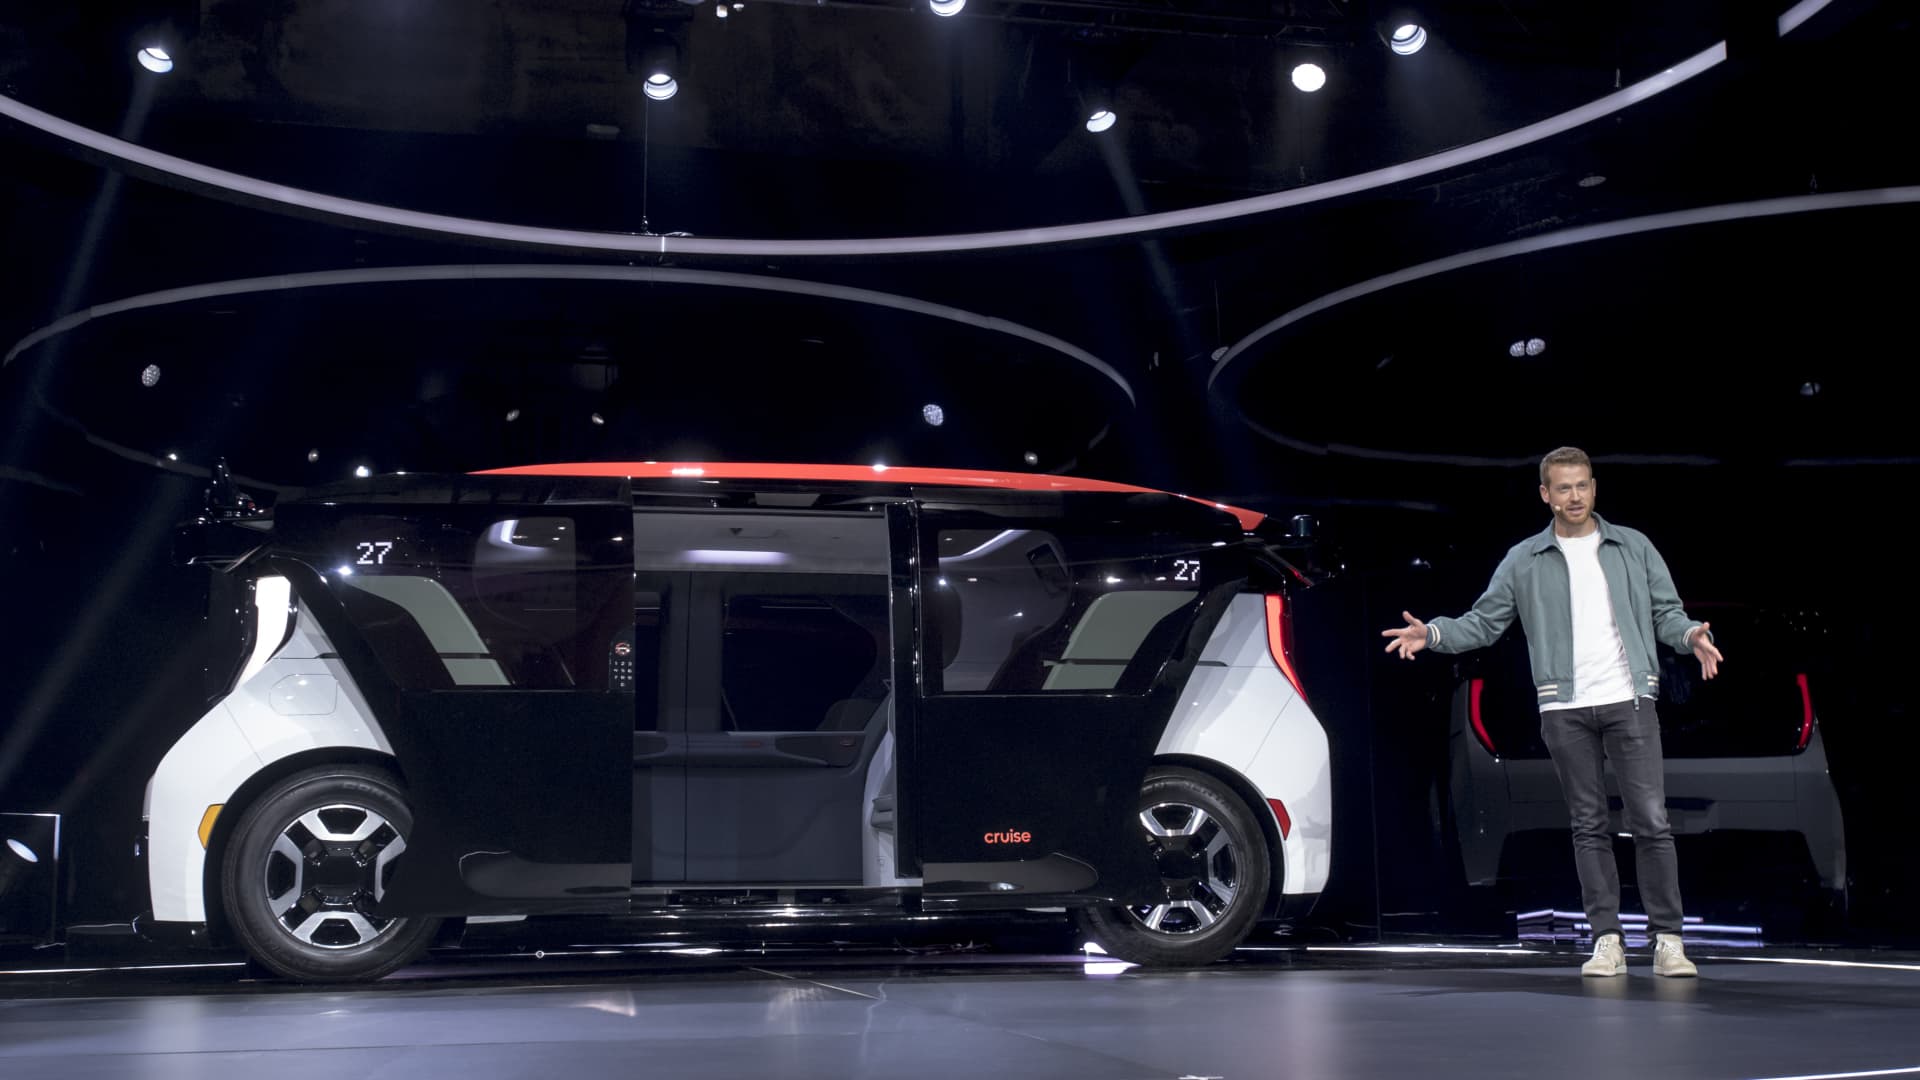 Kyle Vogt, co-founder, president and chief technology officer for Cruise Automation Inc., speaks as he stands next to the Cruise Origin electric driverless shuttle during a reveal event in San Francisco, California, U.S., on Tuesday, Jan. 21, 2020.